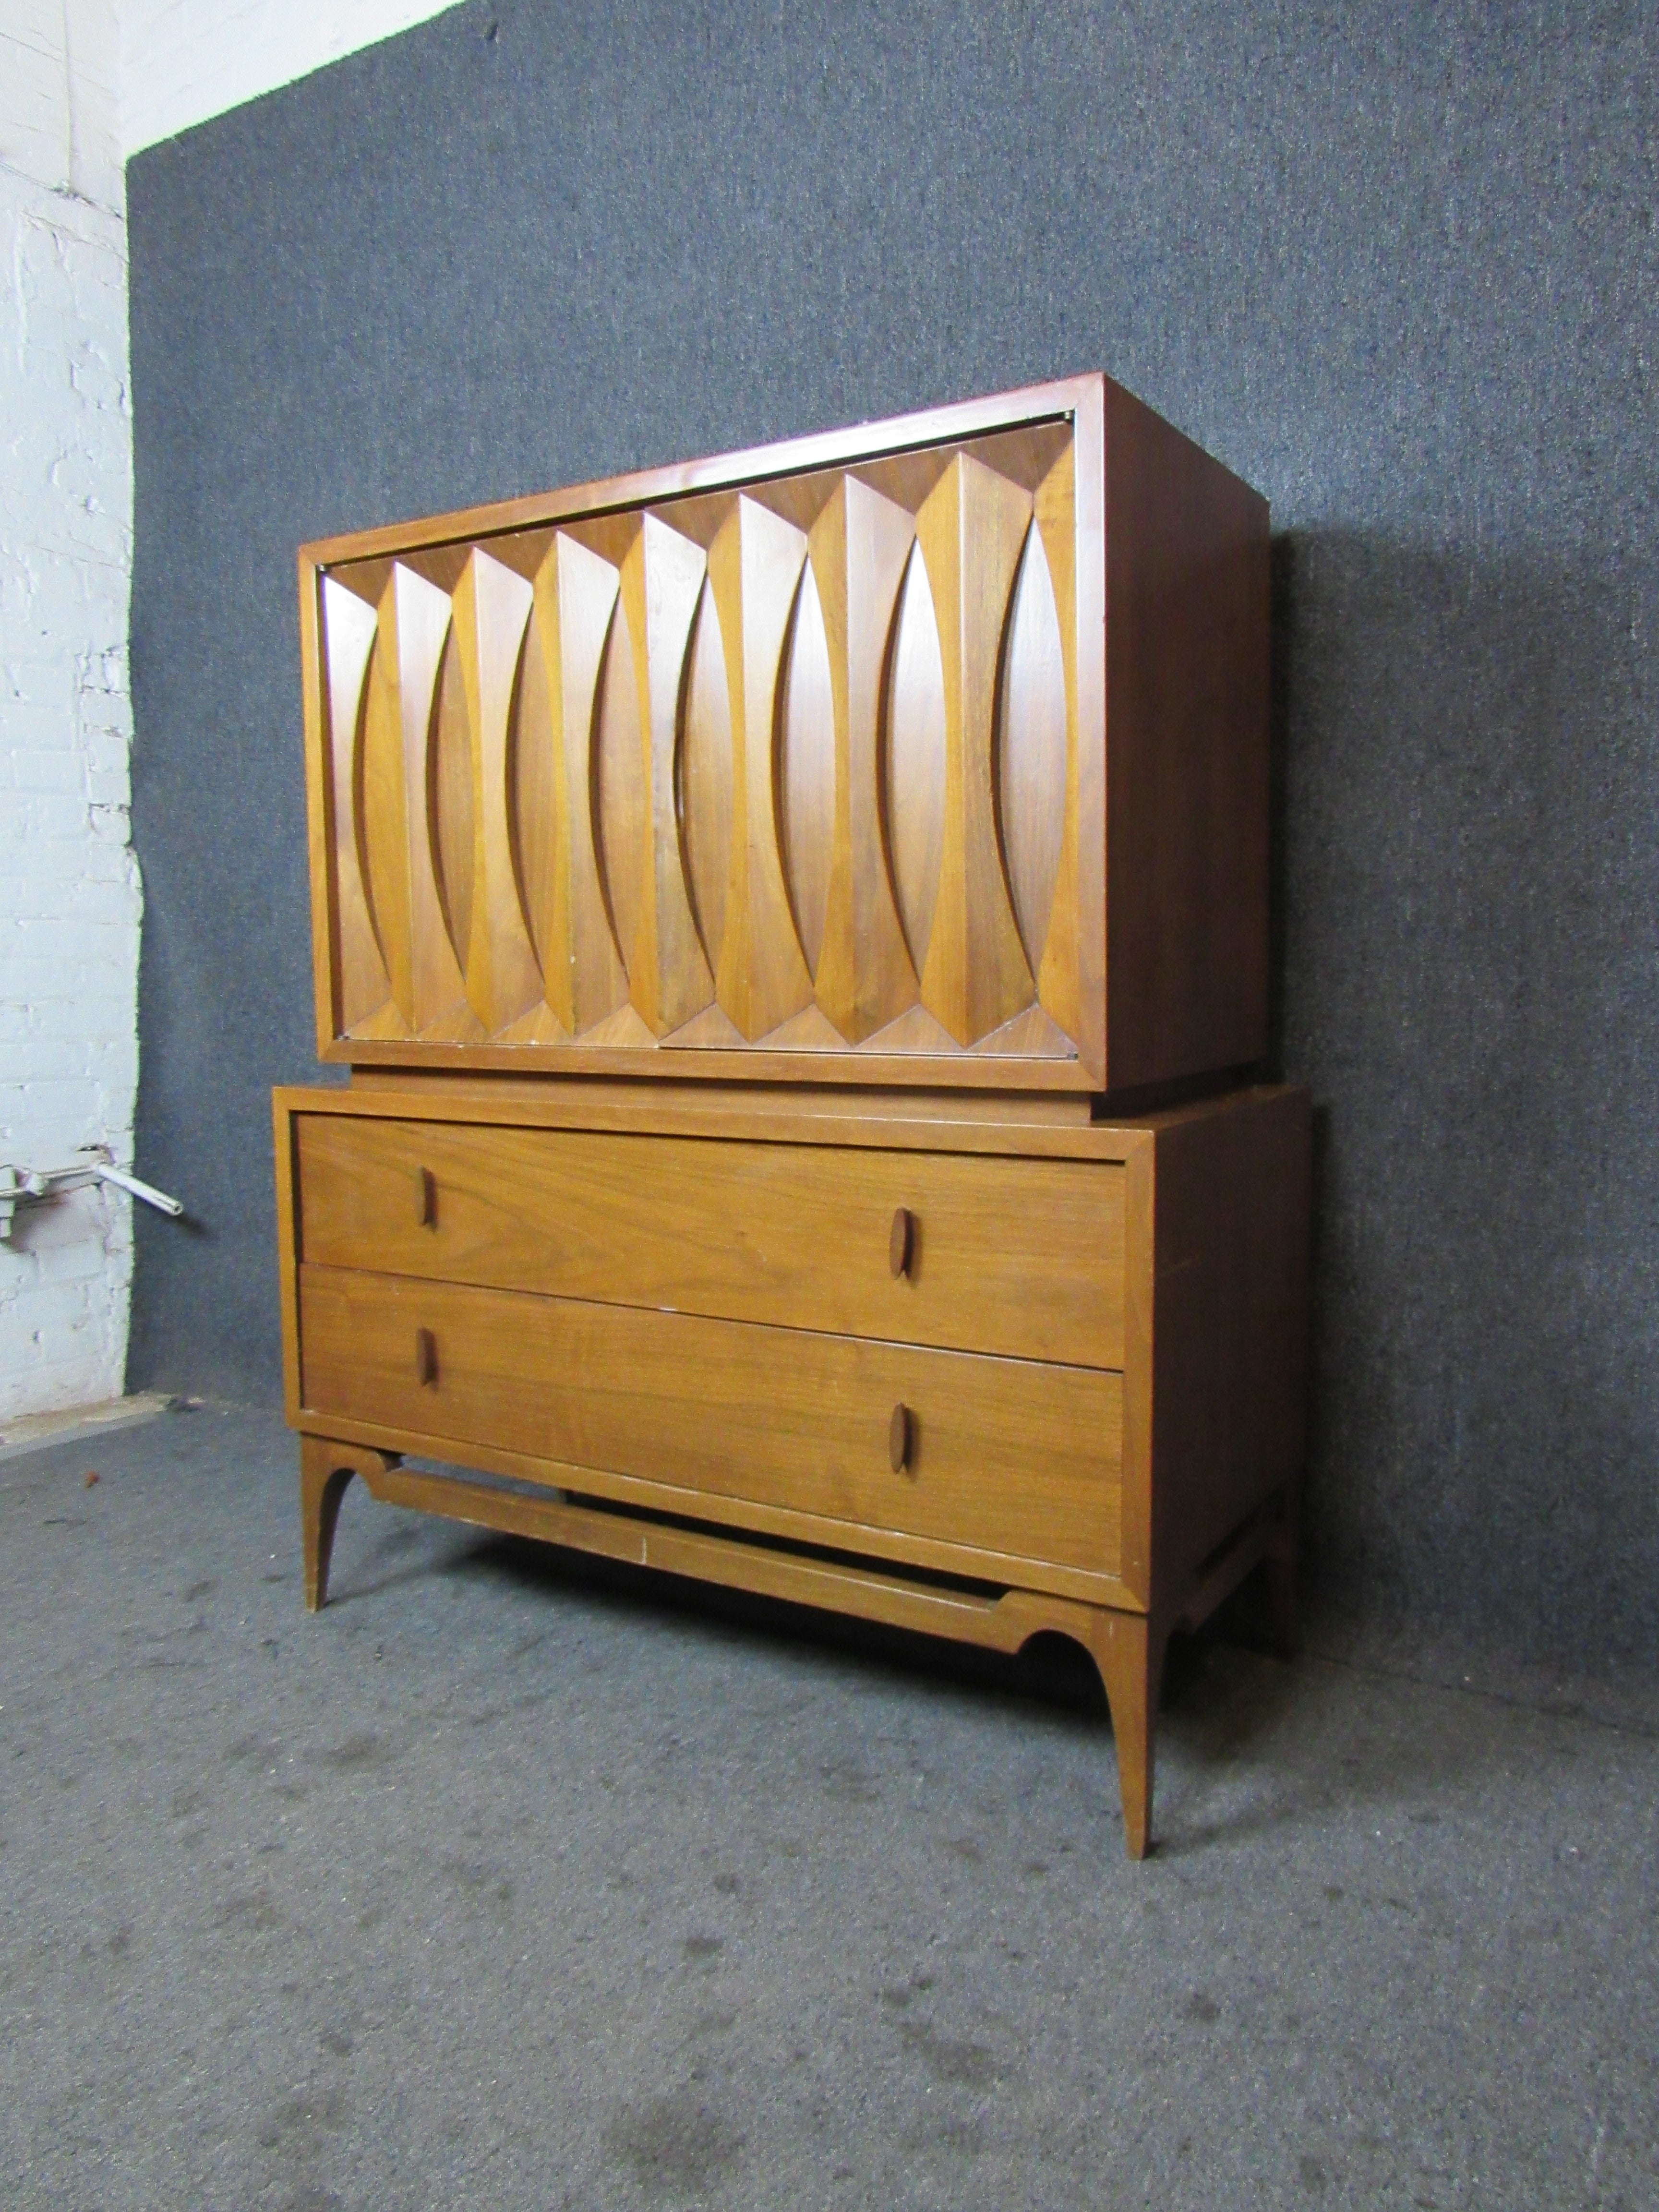 Endlessly interesting Vintage Mid-Century Modern walnut highboy dresser with fantastic sculpted details. A pair of double doors feature a panel of carved bowties reminiscent of the Classic Broyhill Brasilia and Kent Coffey Perspecta lines of the